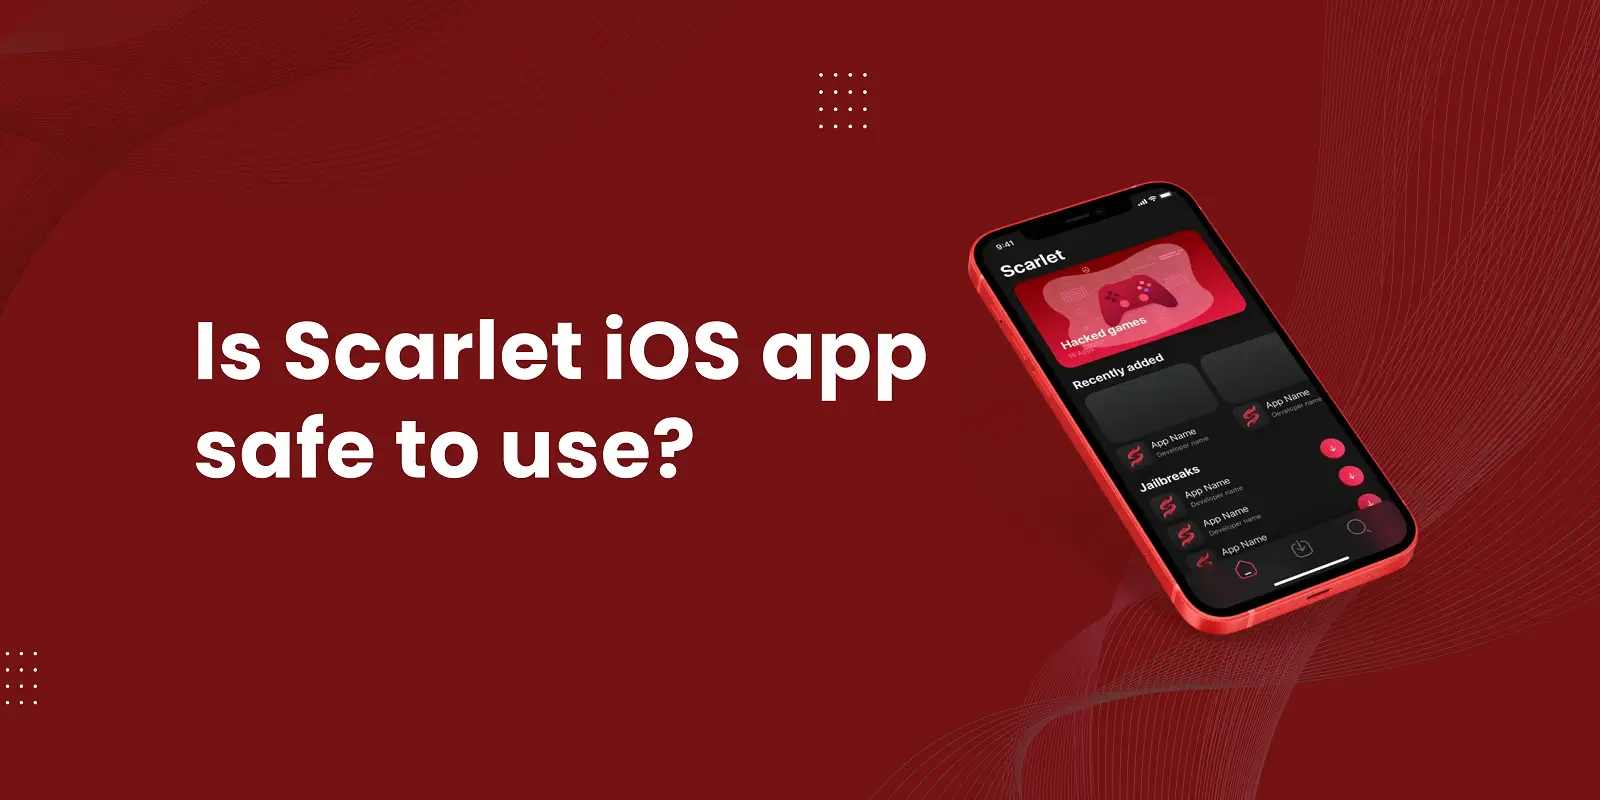 Is scarlet ios app safe to use?